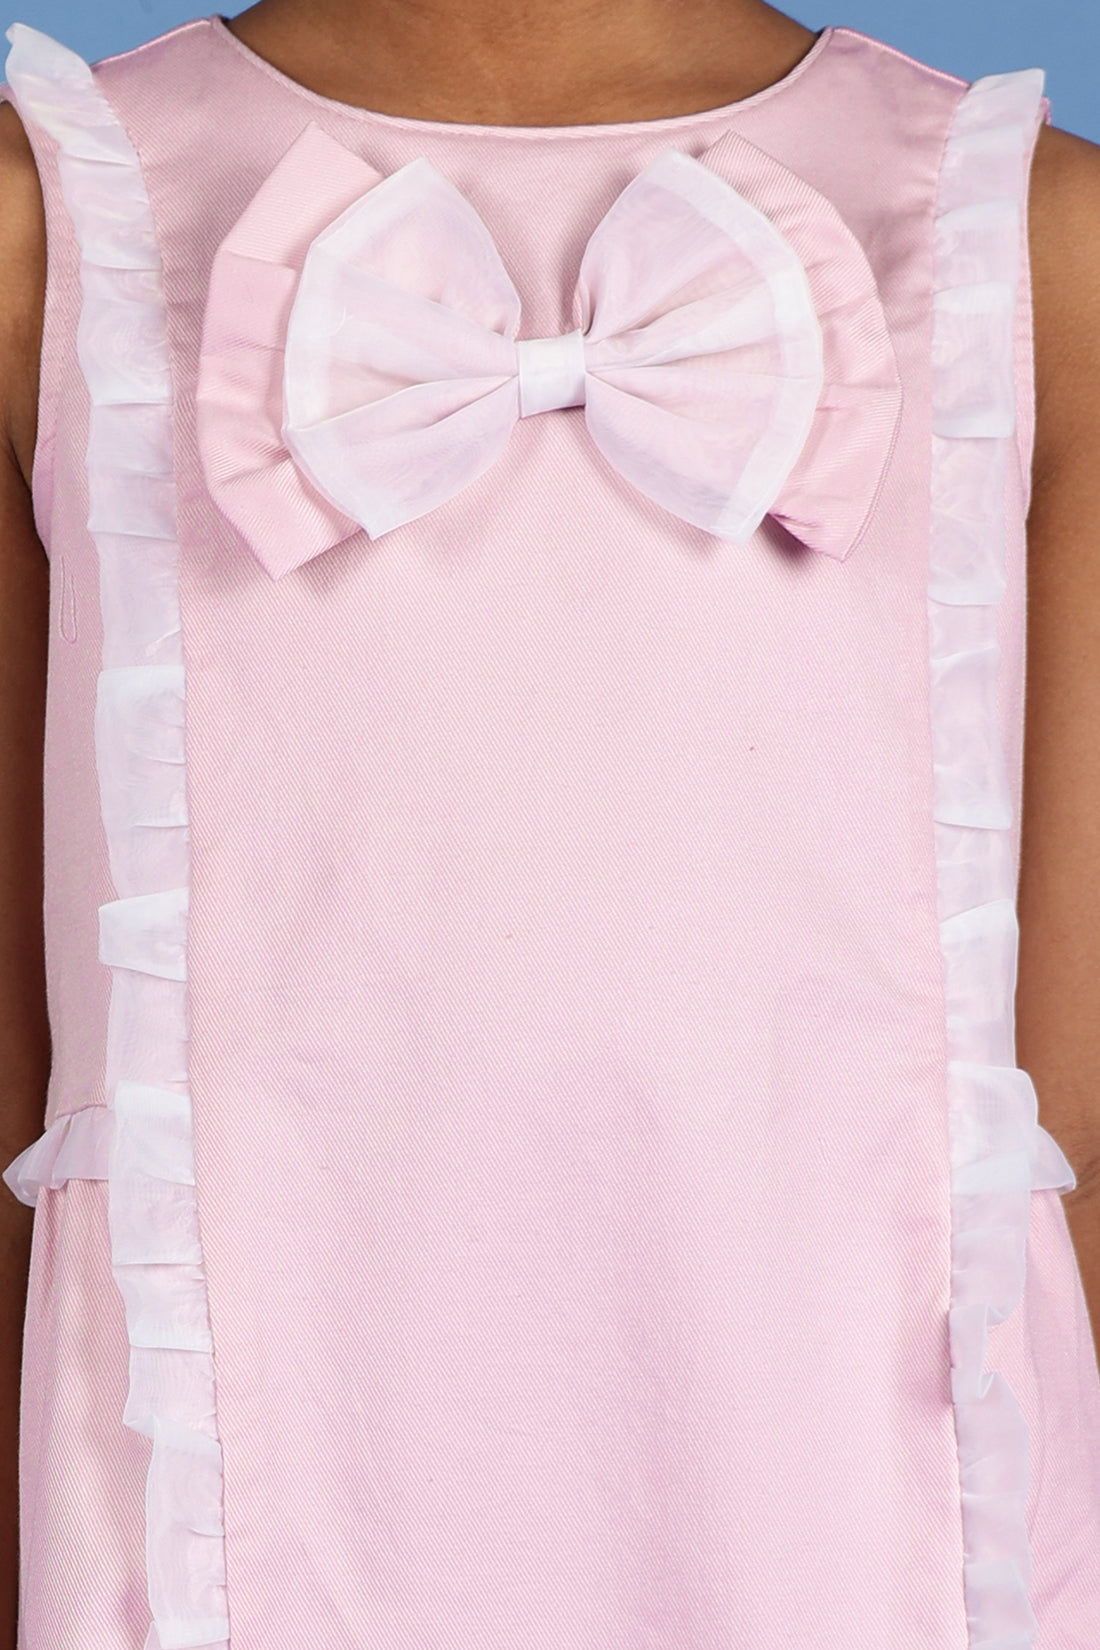 One Friday Kids Girls Pink Cotton Sleeveless Dress With Frills & Bow